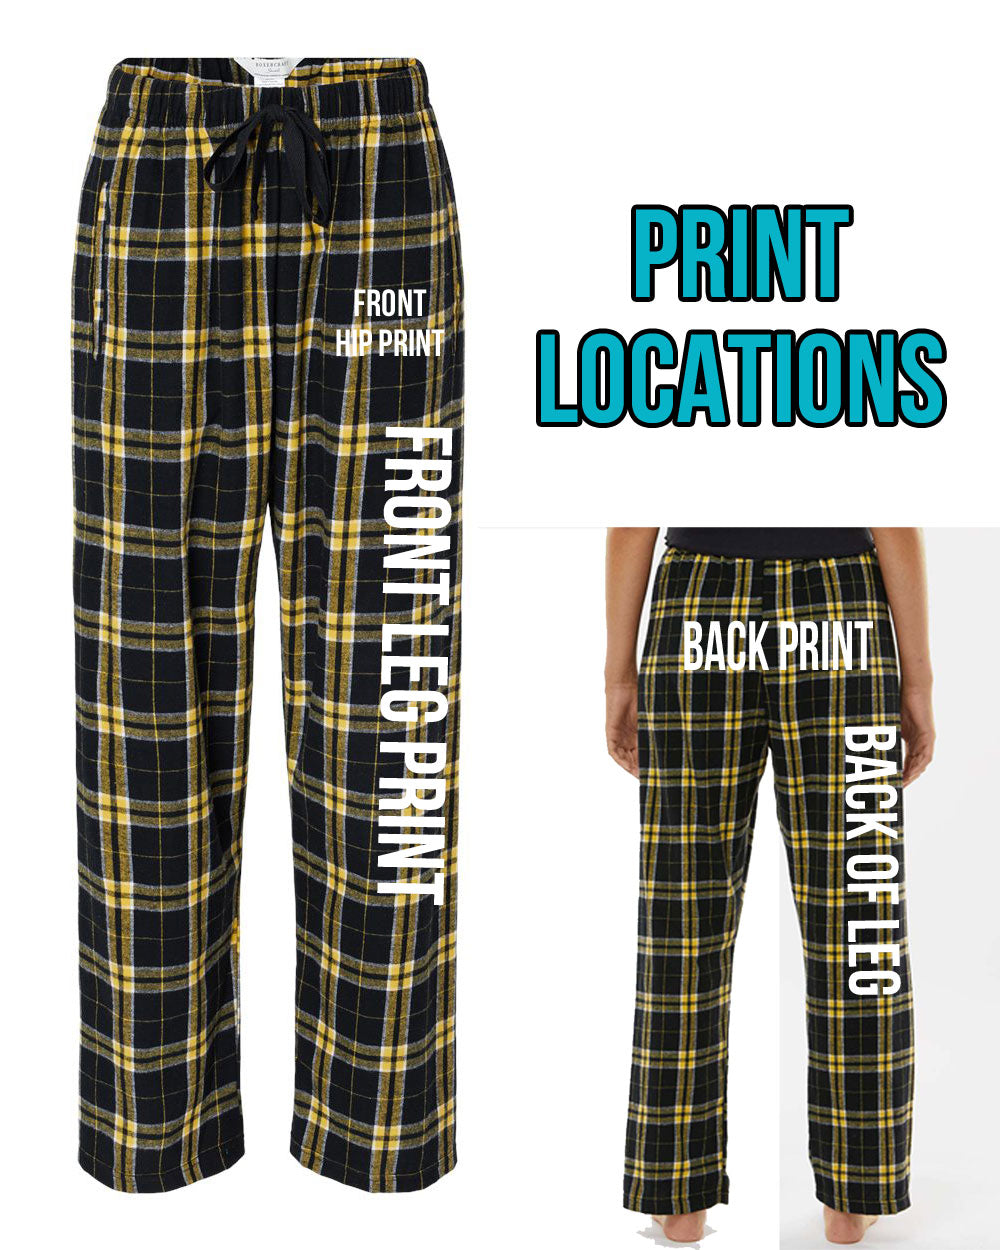 Boxercraft Unisex Flannel Pants Royal and Silver Flannel Pants with Custom Text